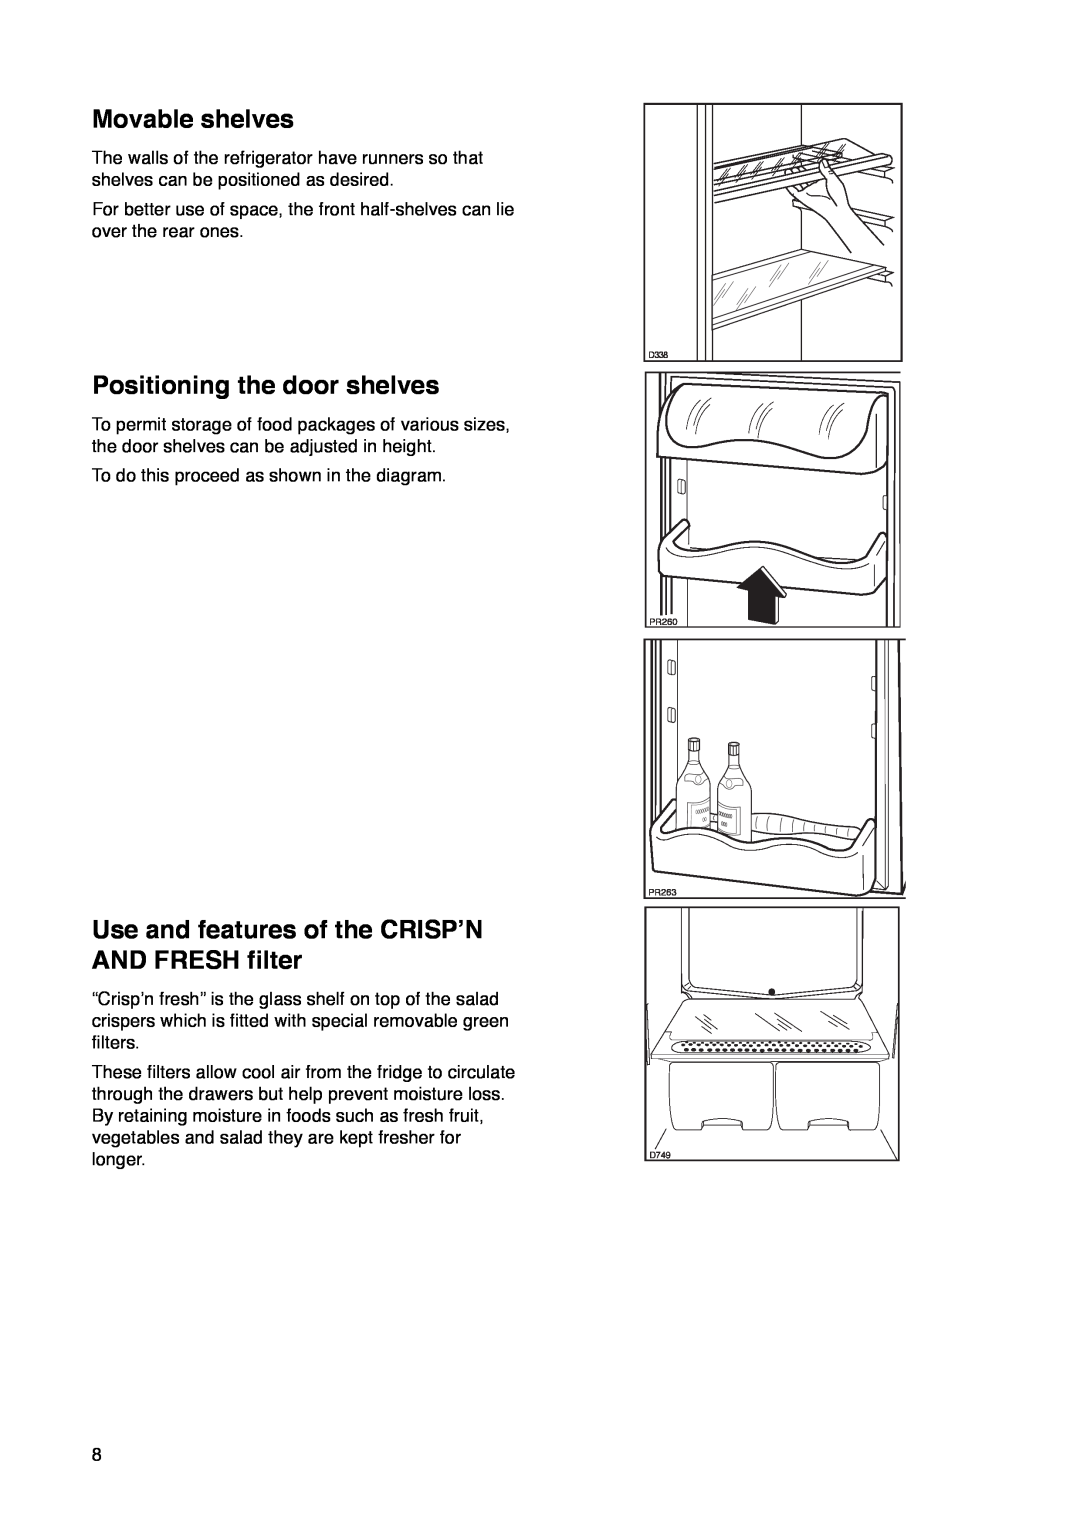 Zanussi ZK 60/30 RM manual Movable shelves, Positioning the door shelves, Use and features of the CRISPÕN AND FRESH filter 